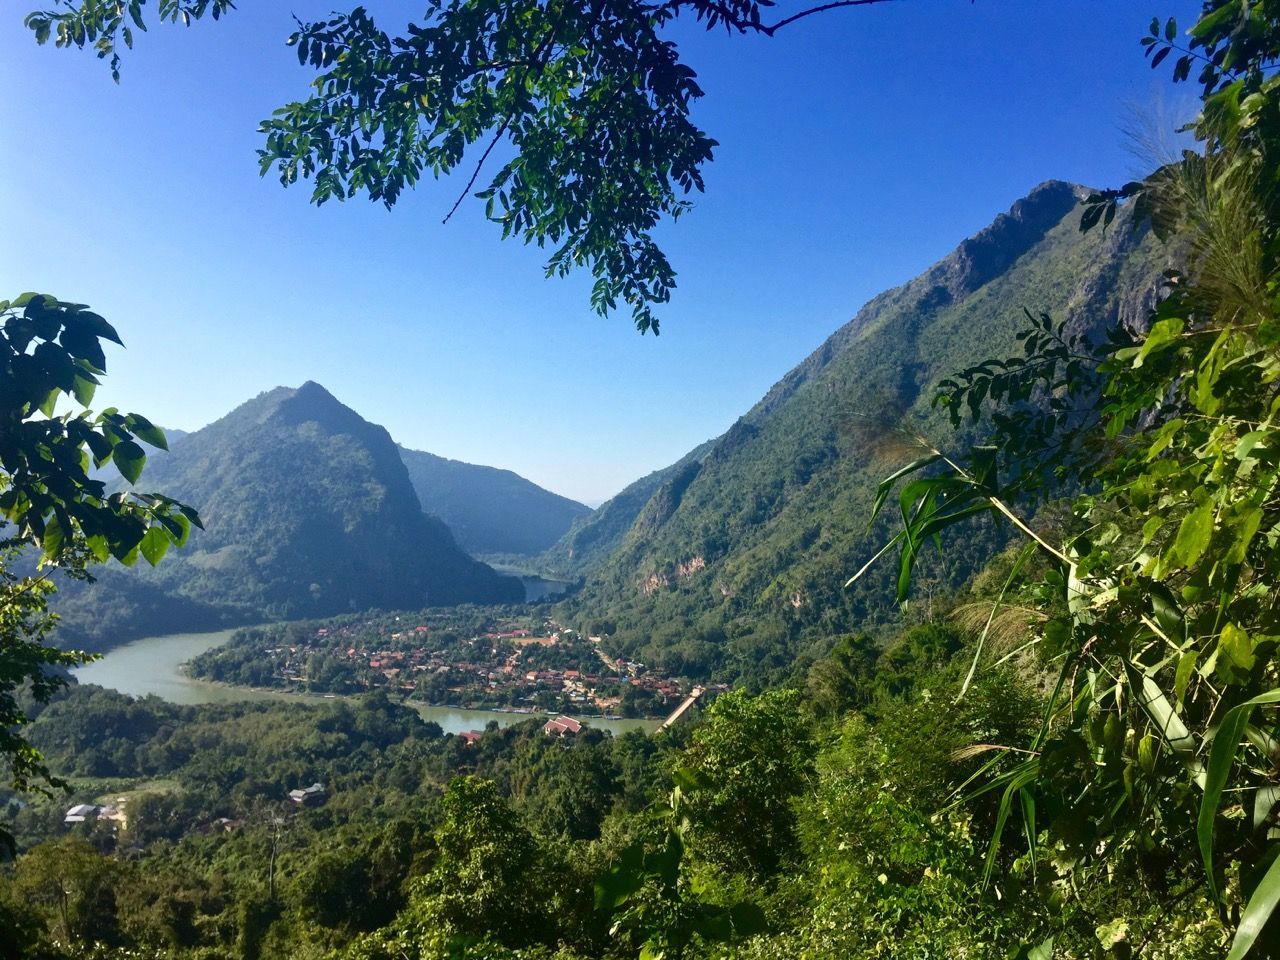 View of Nong Khiaw from the trail.